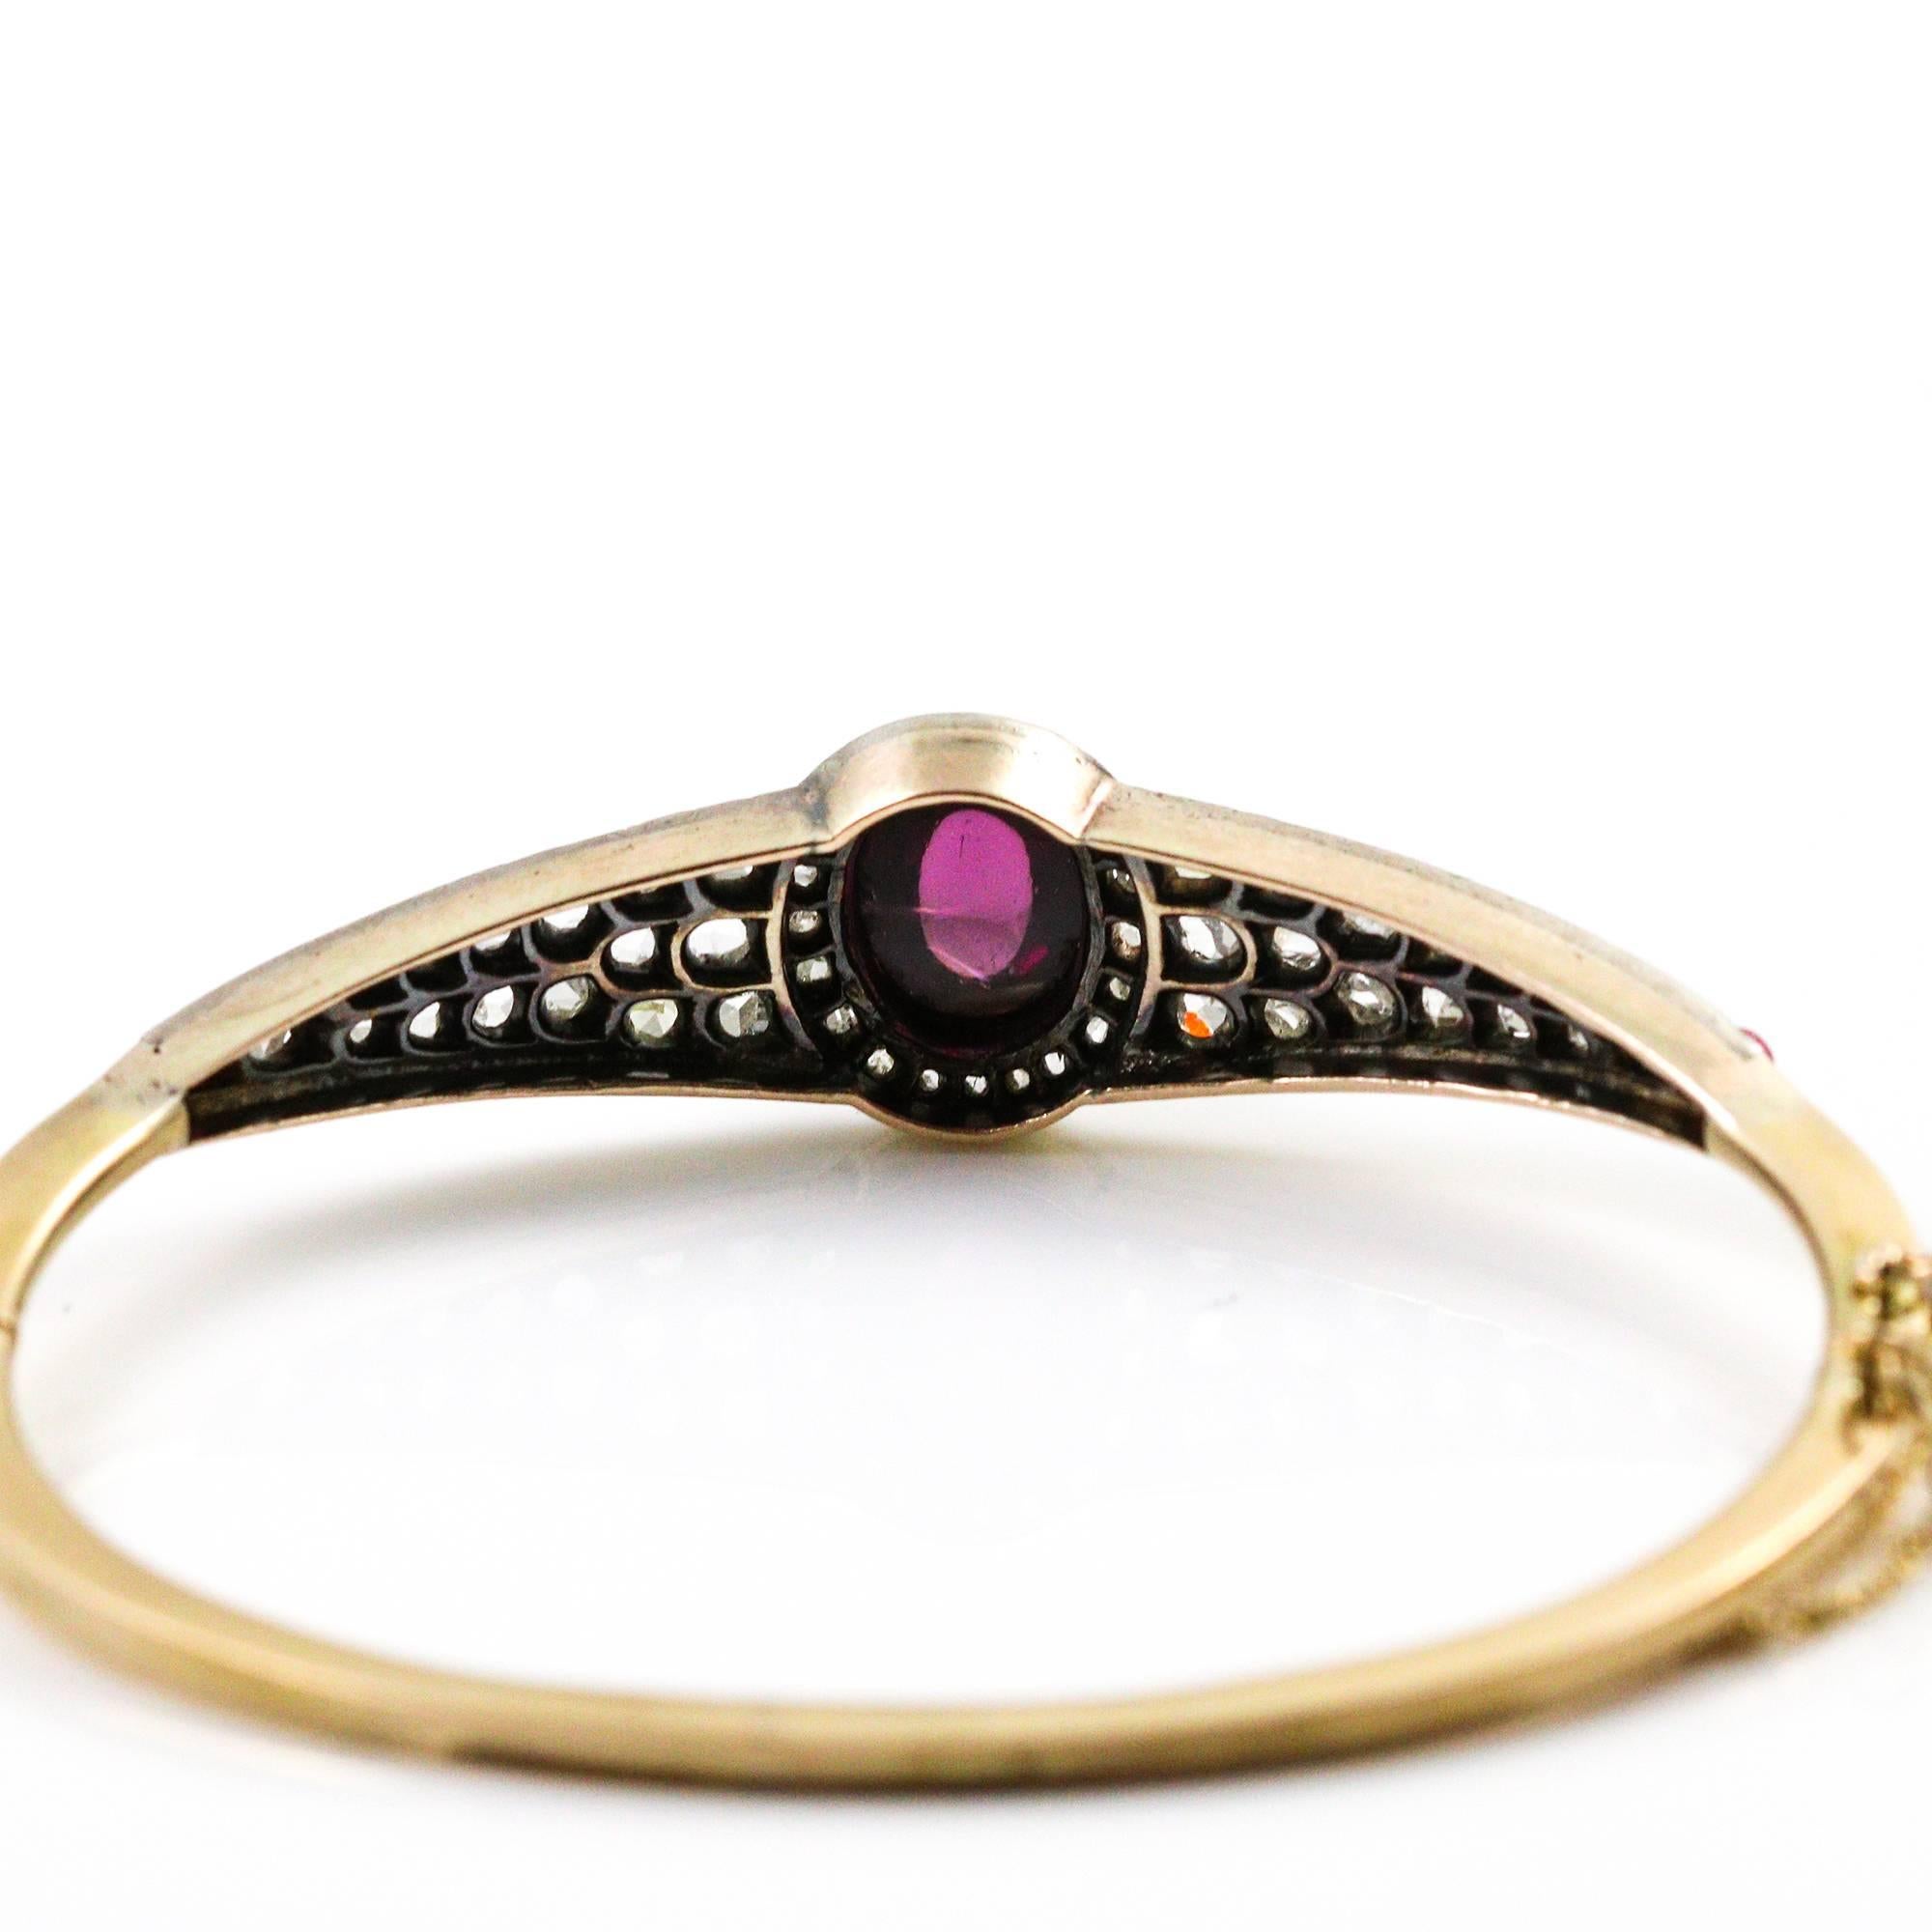 This early Victorian bracelet centers a cabochon cut rubelite tourmaline which measures 10.75 x 8.55 mm. It is accented by a halo of 21 old rose cut diamonds and a design made up of 15 old rose cut diamonds and 1 small cabochon rubelite tourmaline